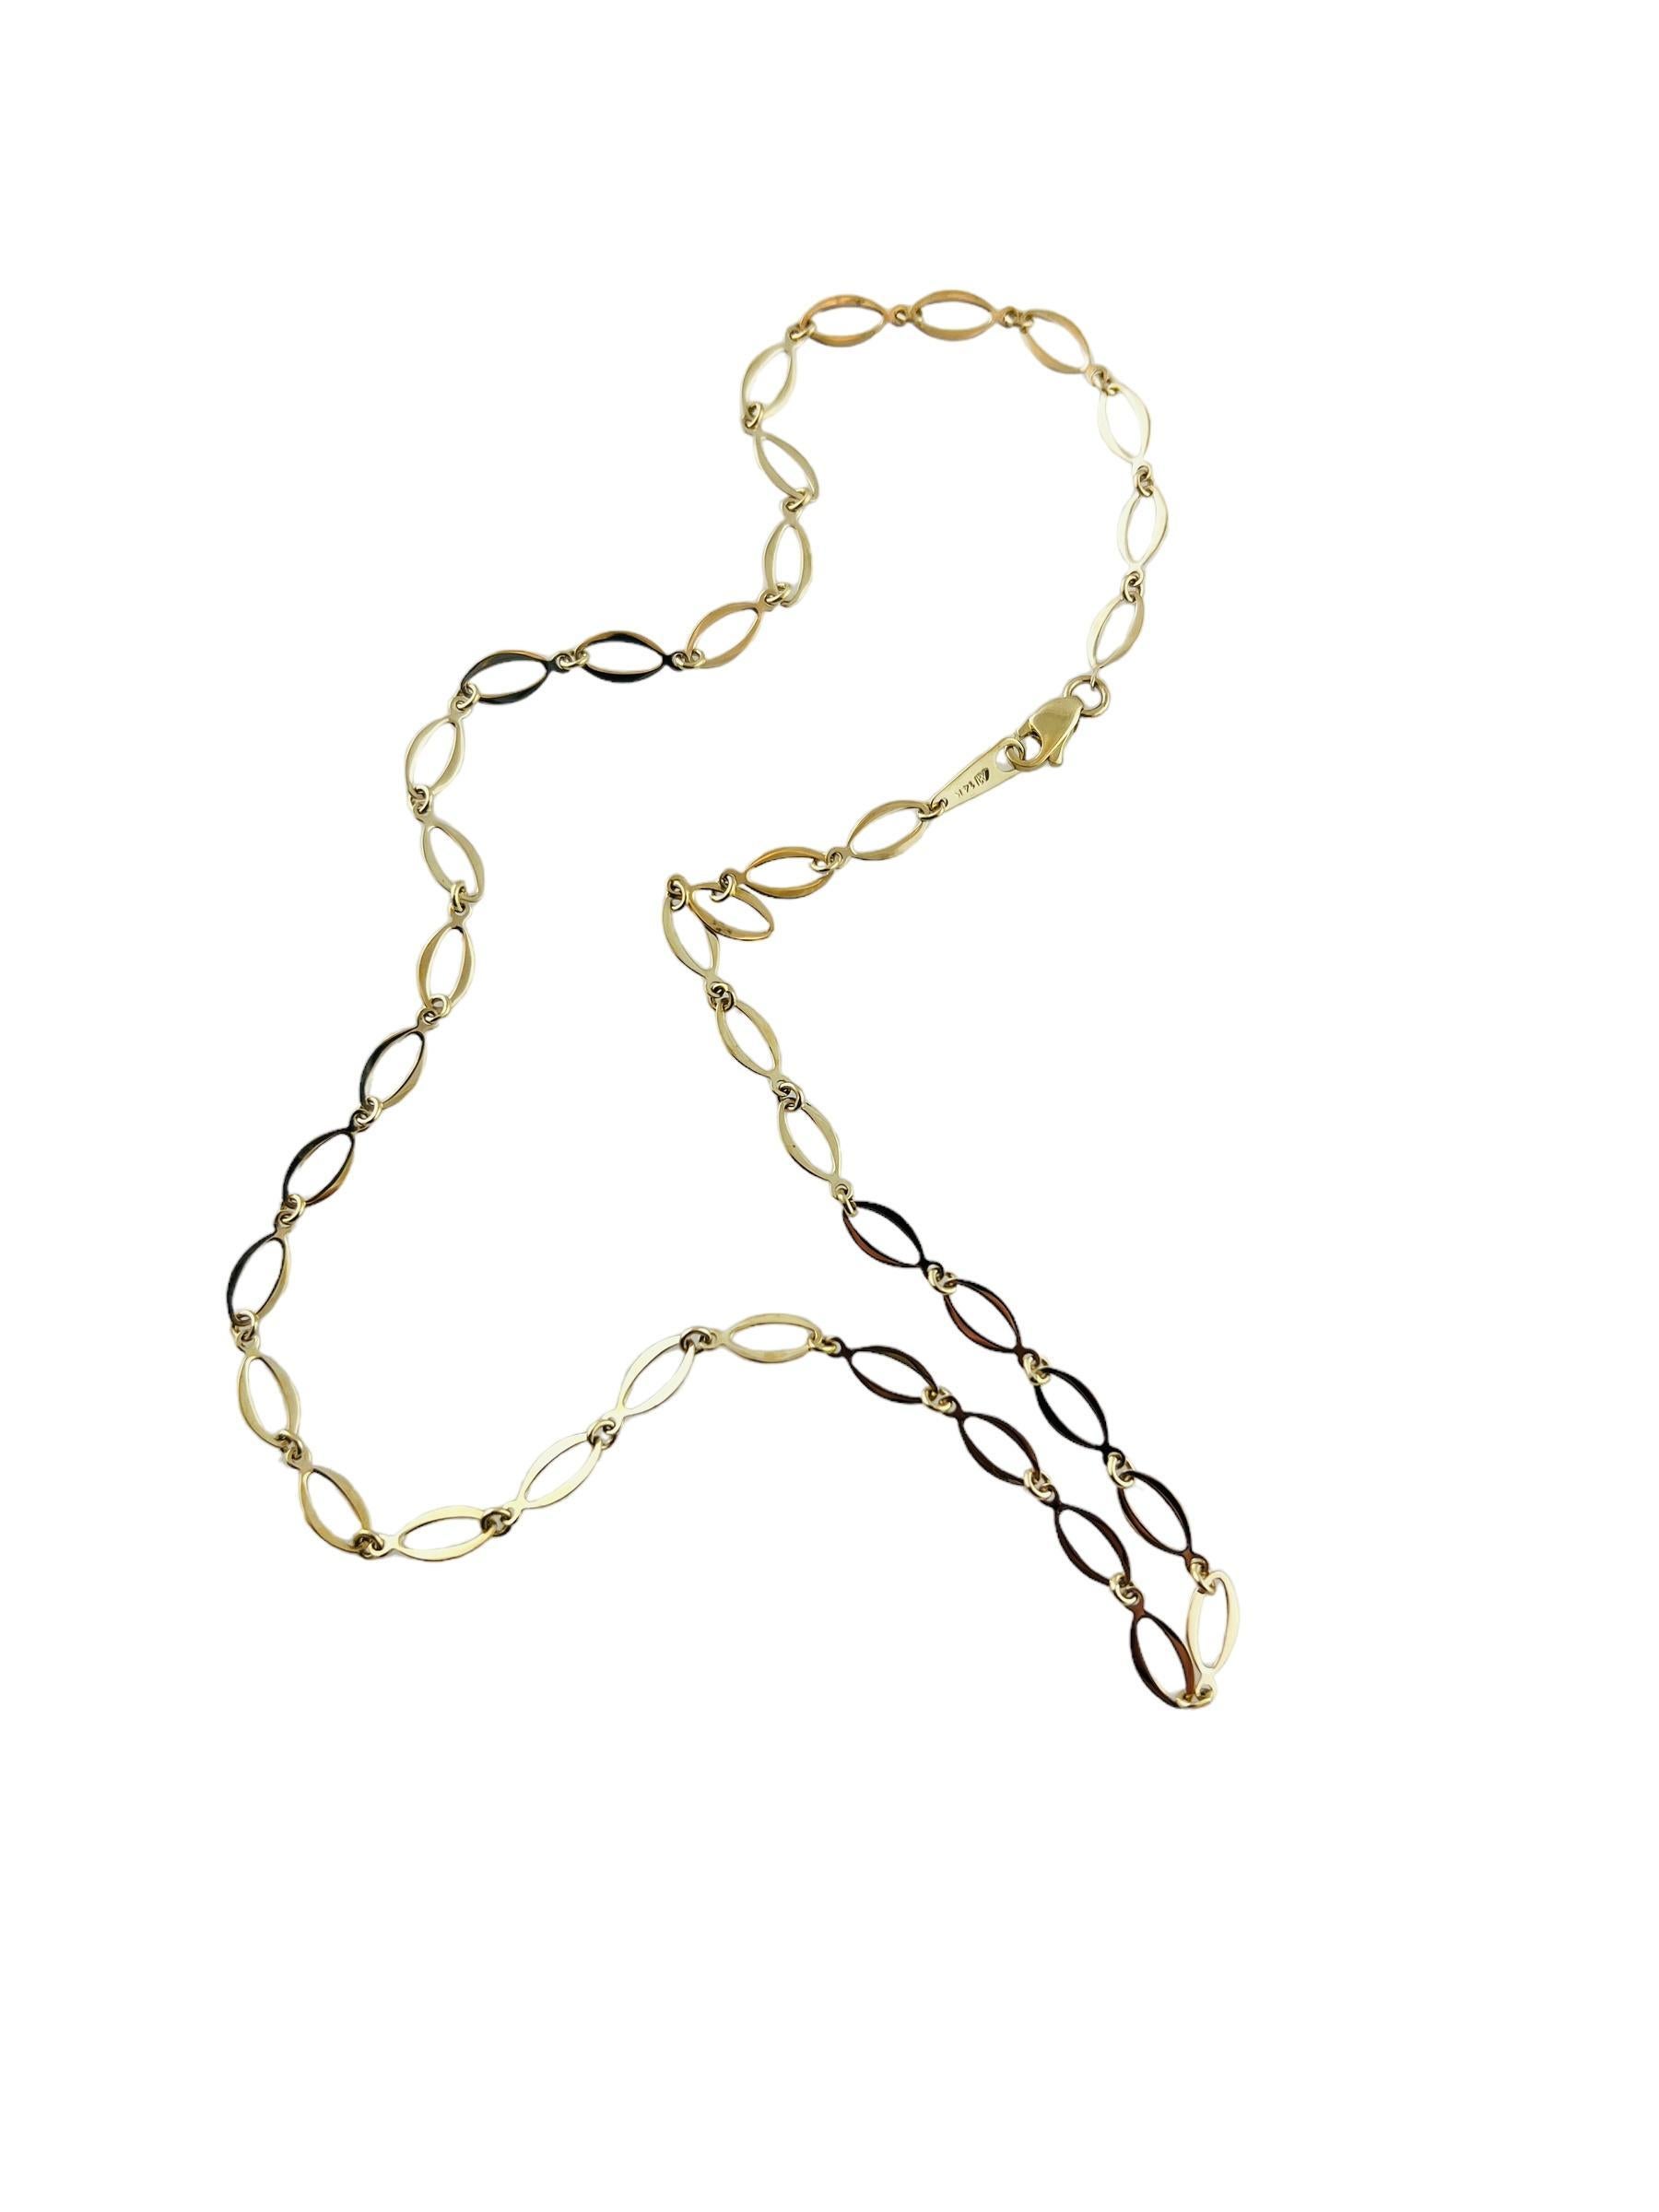 14K Yellow Gold Oval Link Necklace

This lovely oval link necklace is set in 14k yellow gold

17